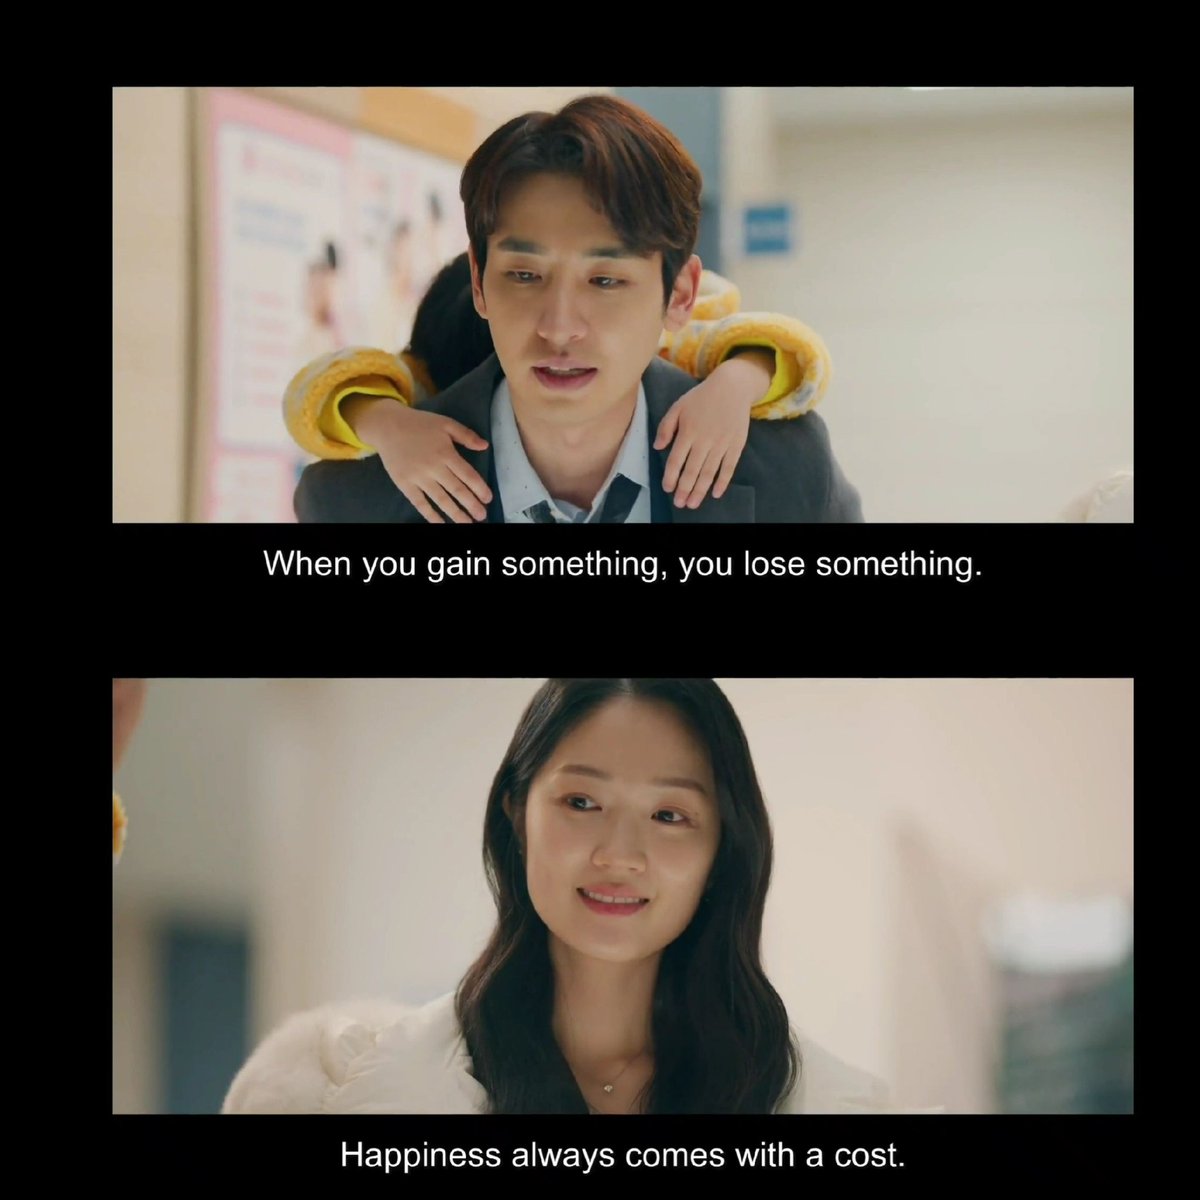 When you gain something, you lose something. Happiness always comes with a cost. ~ Lovely Runner EP 7

#LovelyRunner #kdrama #kdramaquotes #quotes